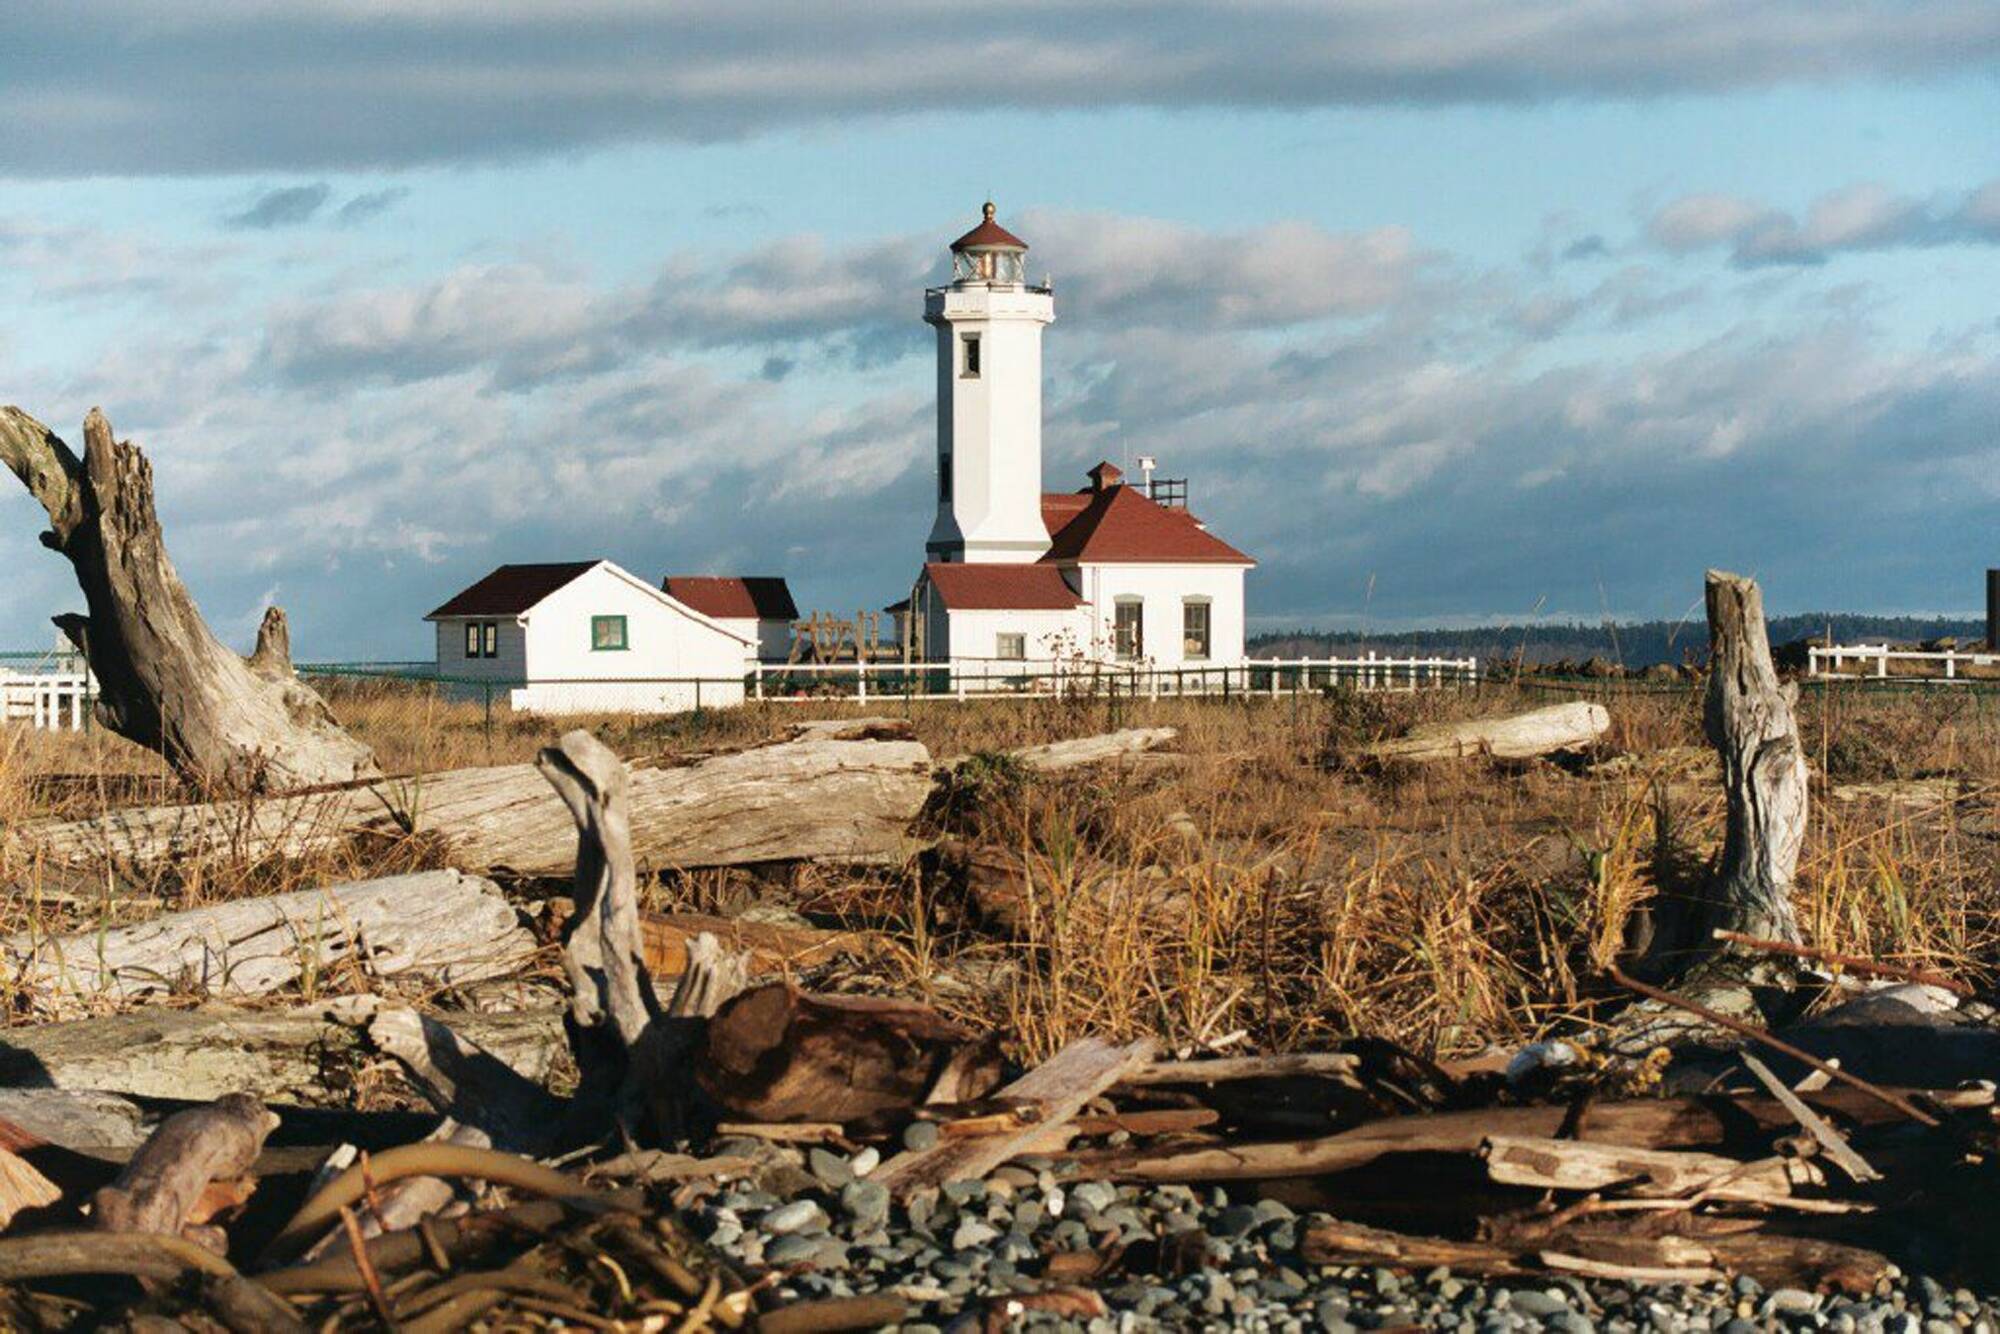 Kristin Jackson | Seattle Times | TNS | File Photo
Point Wilson lighthouse sits at the tip of Fort Worden State Park near Port Townsend.